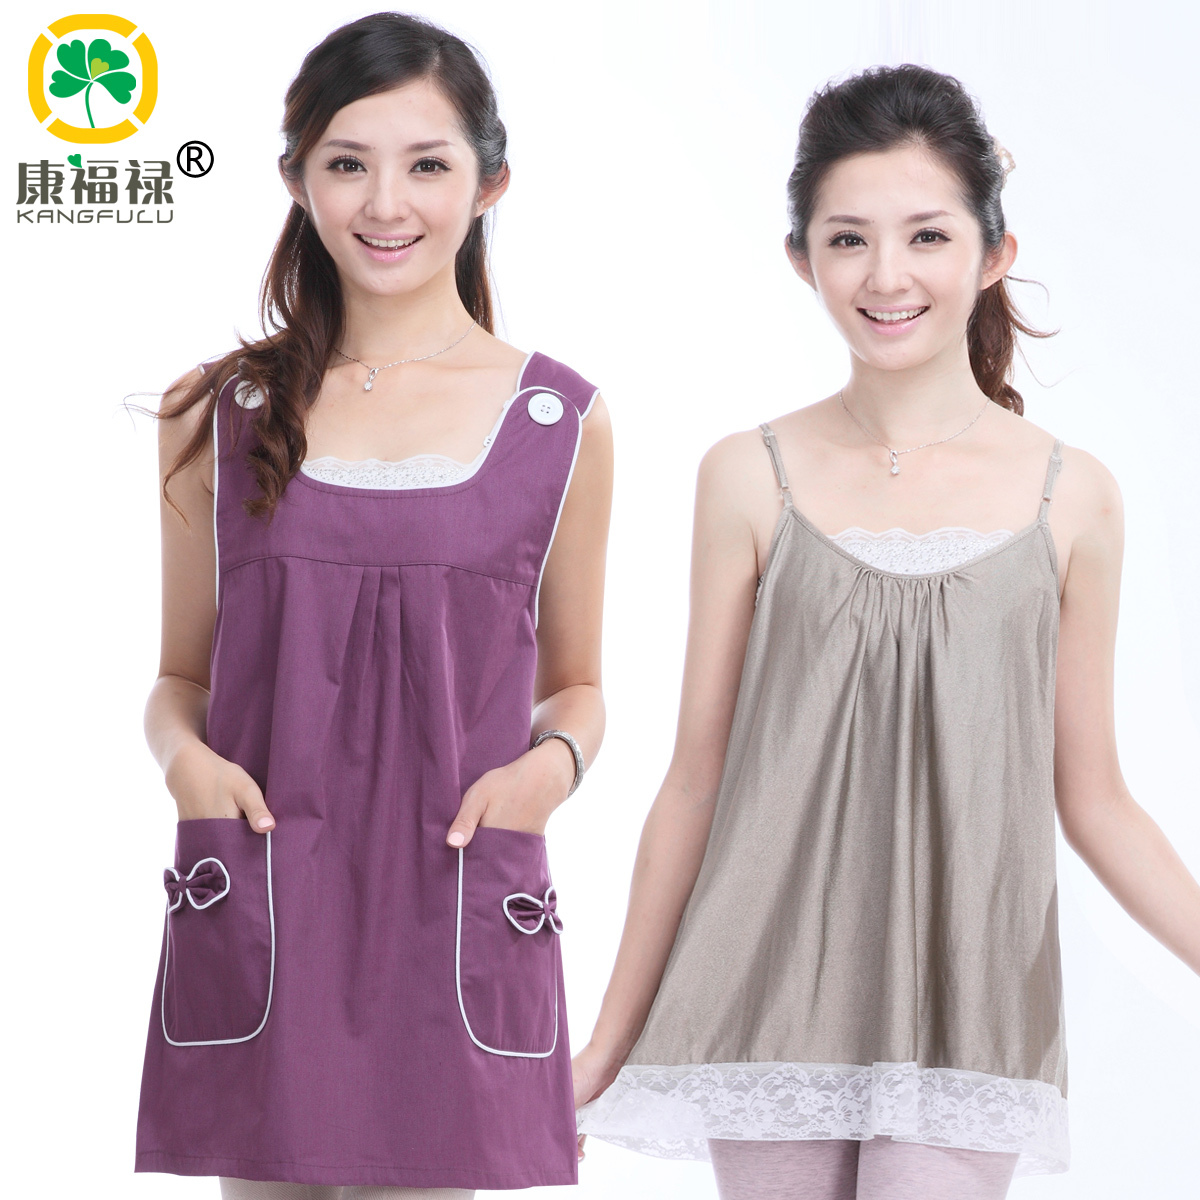 Quality radiation-resistant maternity clothing tank dress pure silver fiber spaghetti strap superacids protection